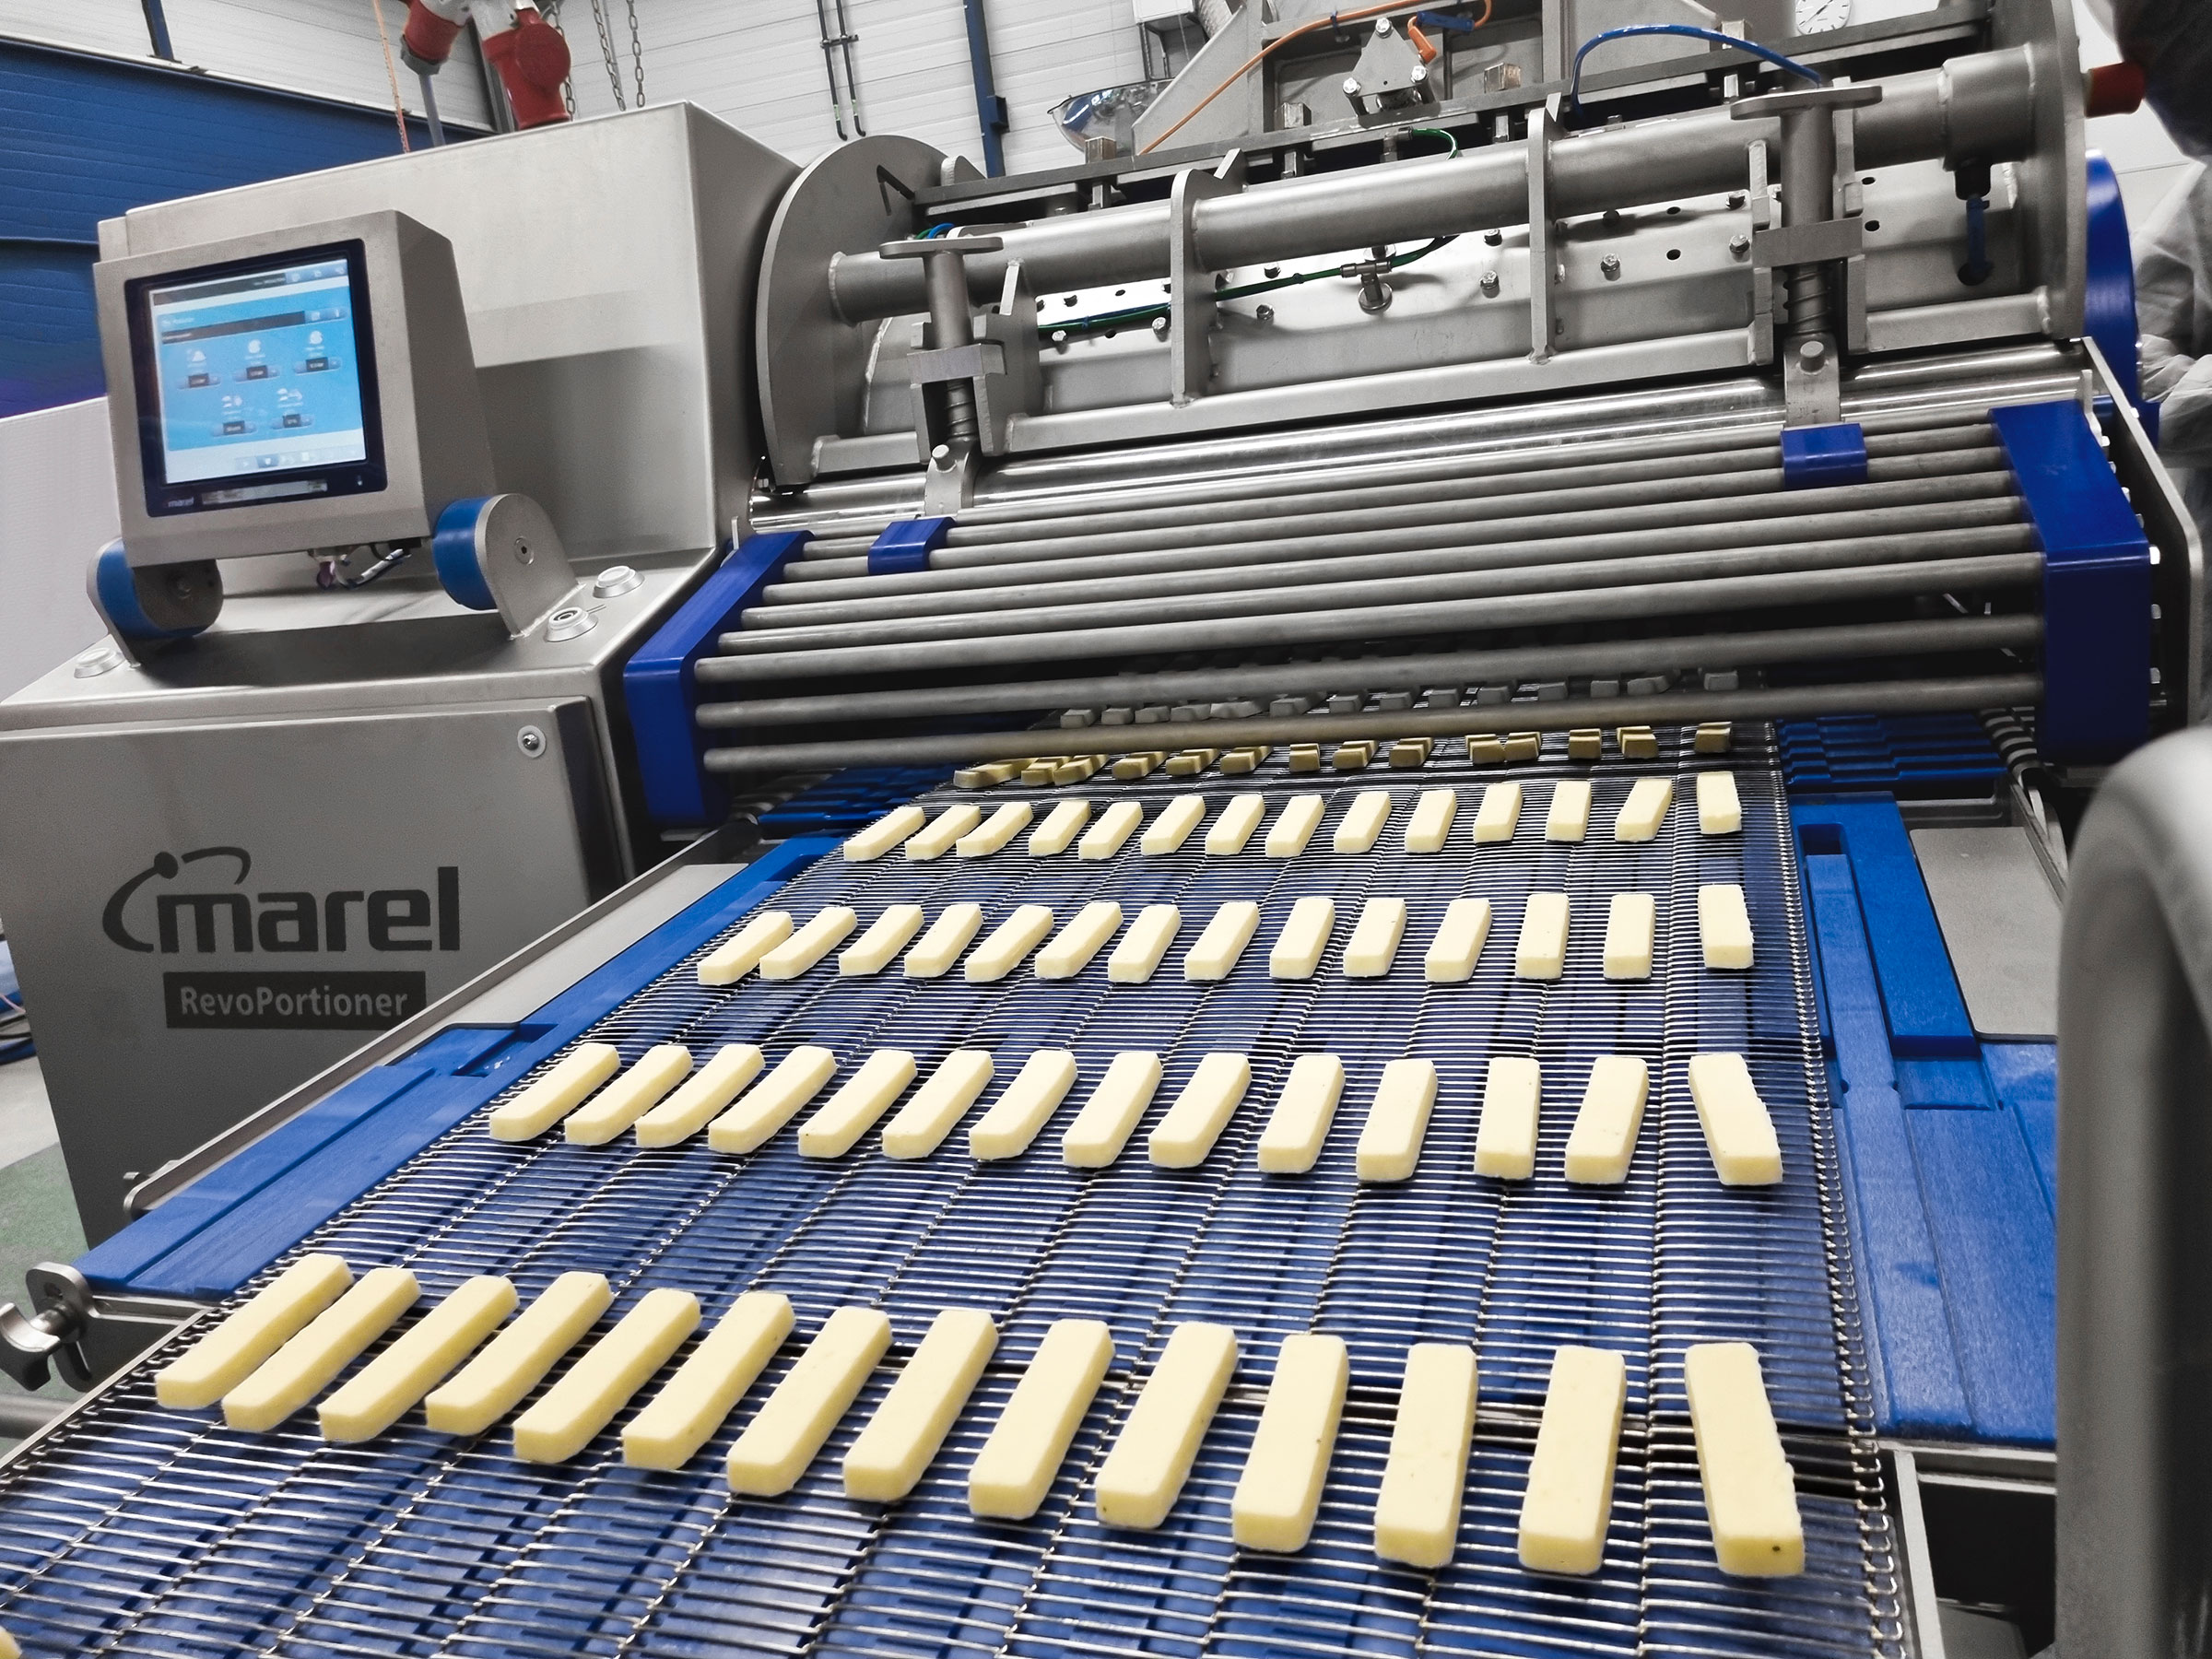 Forming cheese products